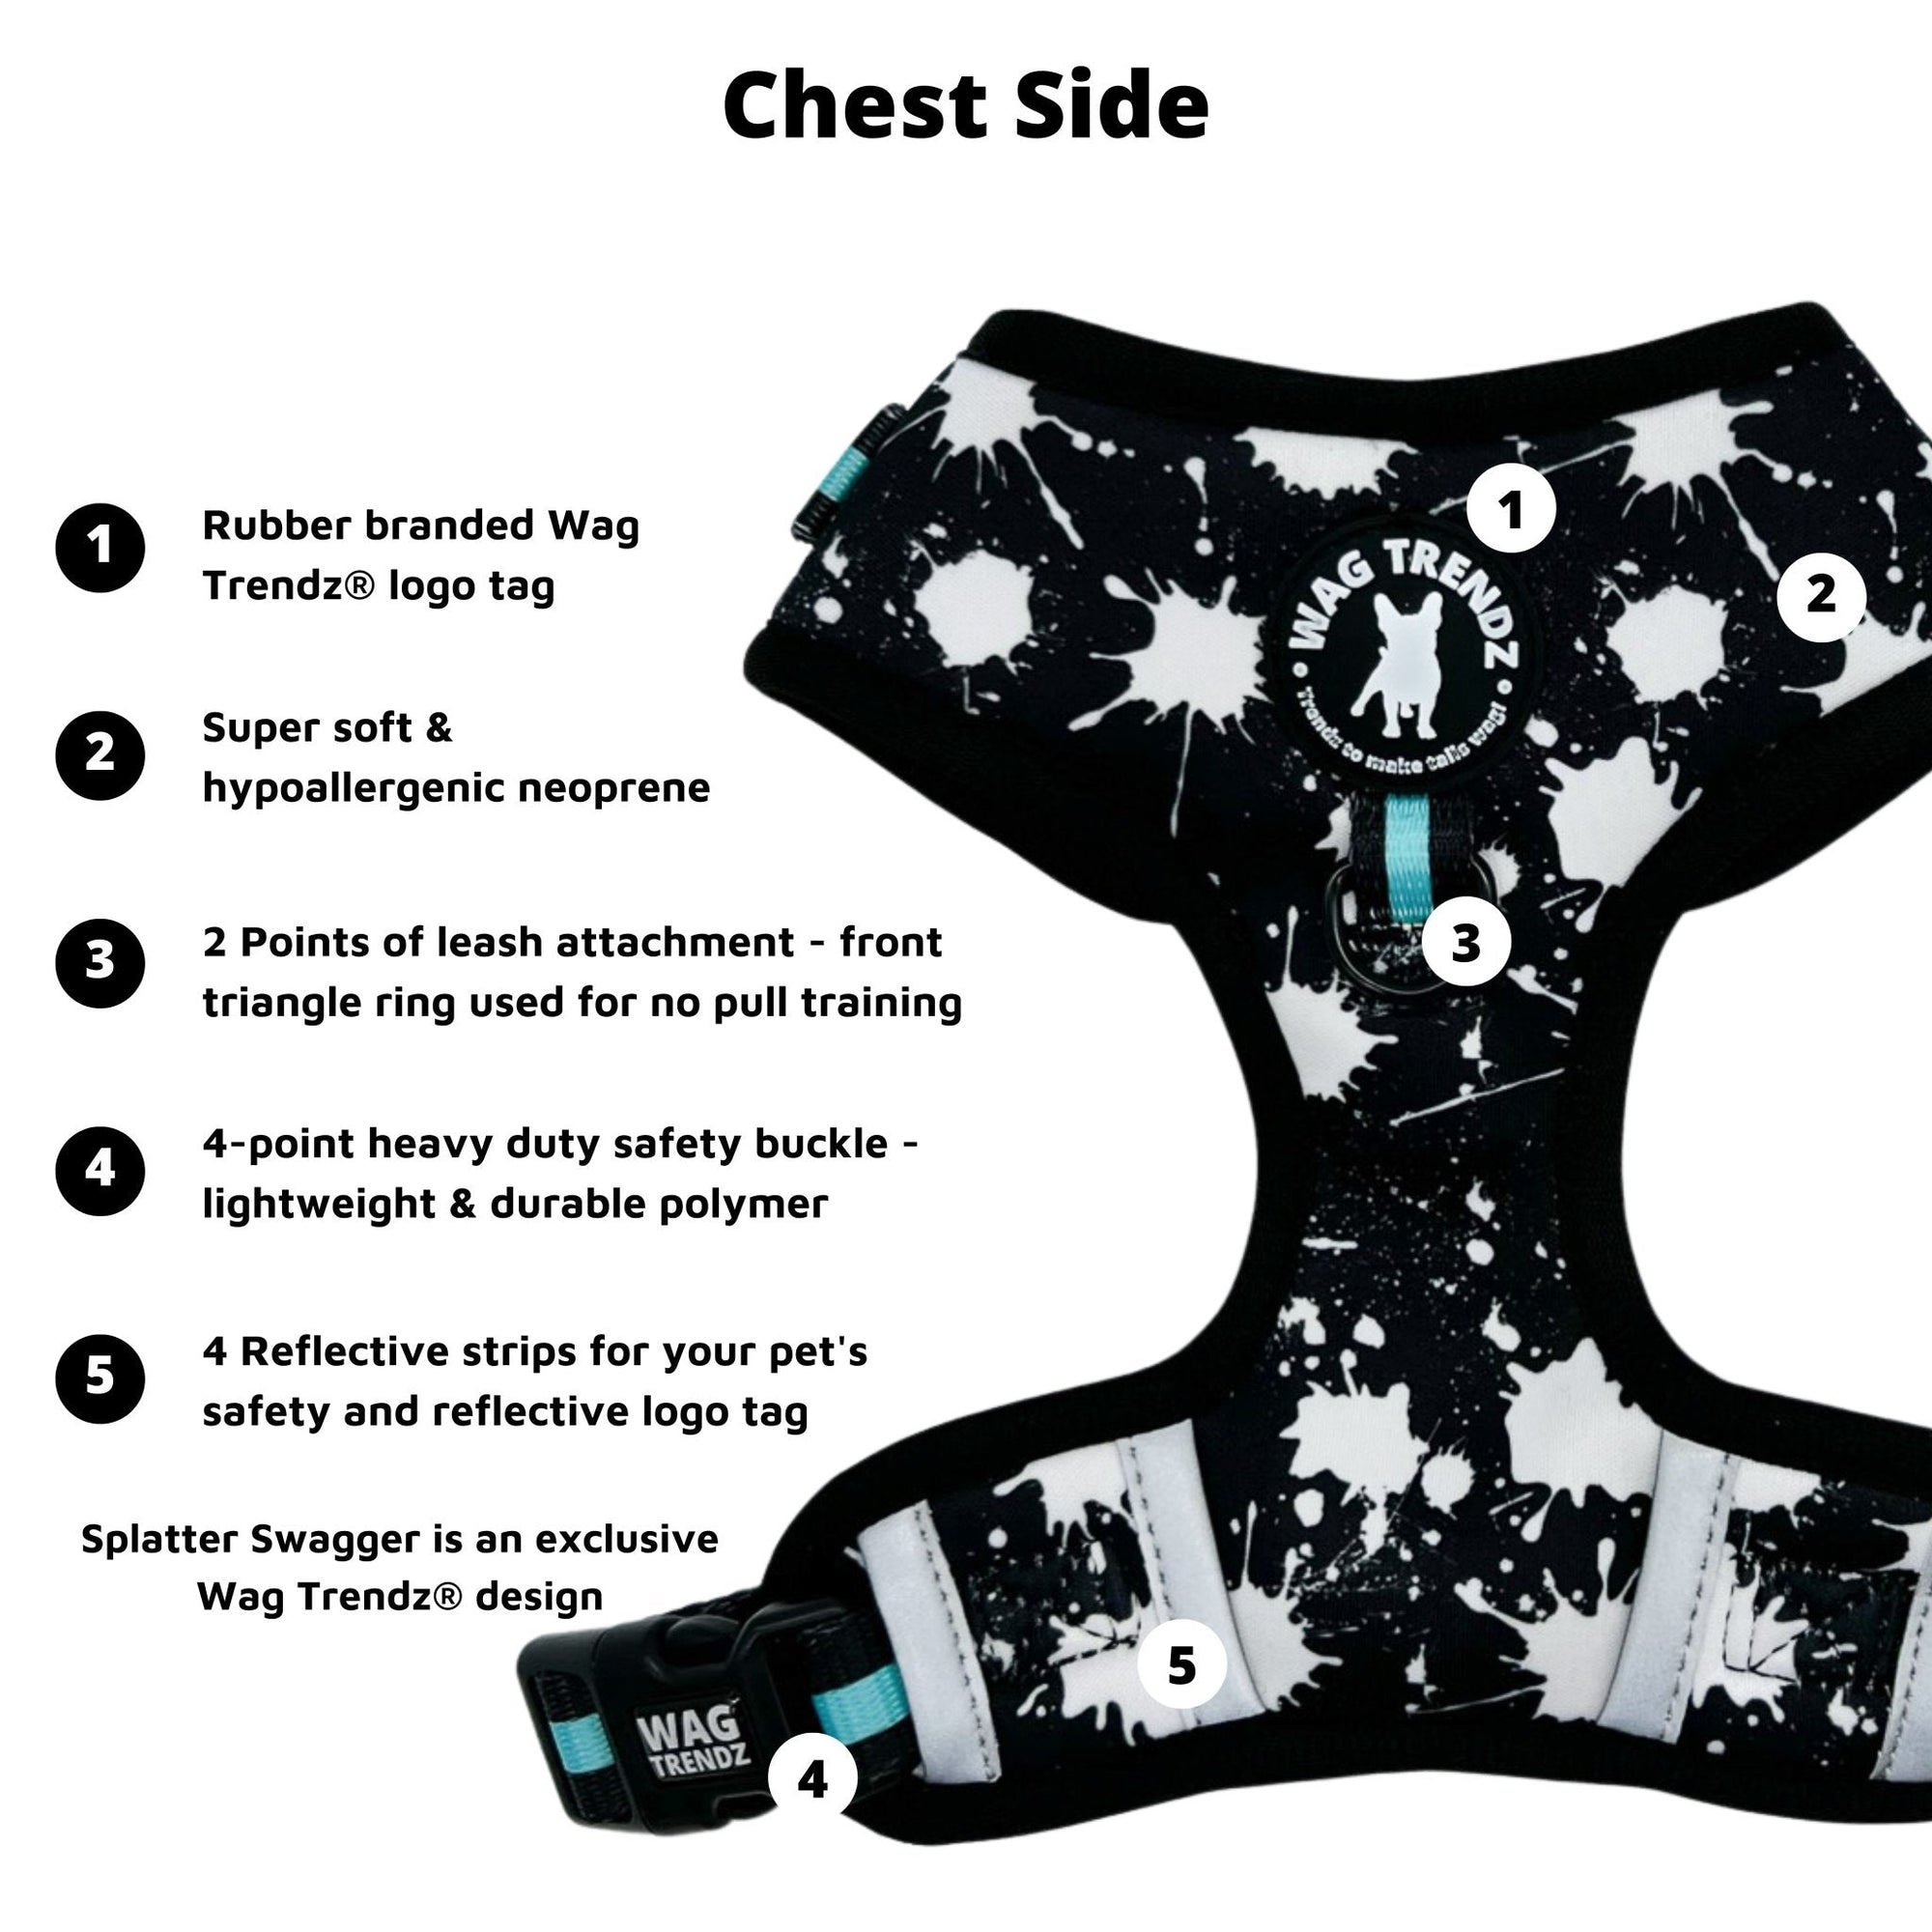 No Pull Dog Harness - black adjustable harness with white paint splatter and teal accents with product feature captions - front clip for no pull training - against a solid white background - Wag Trendz